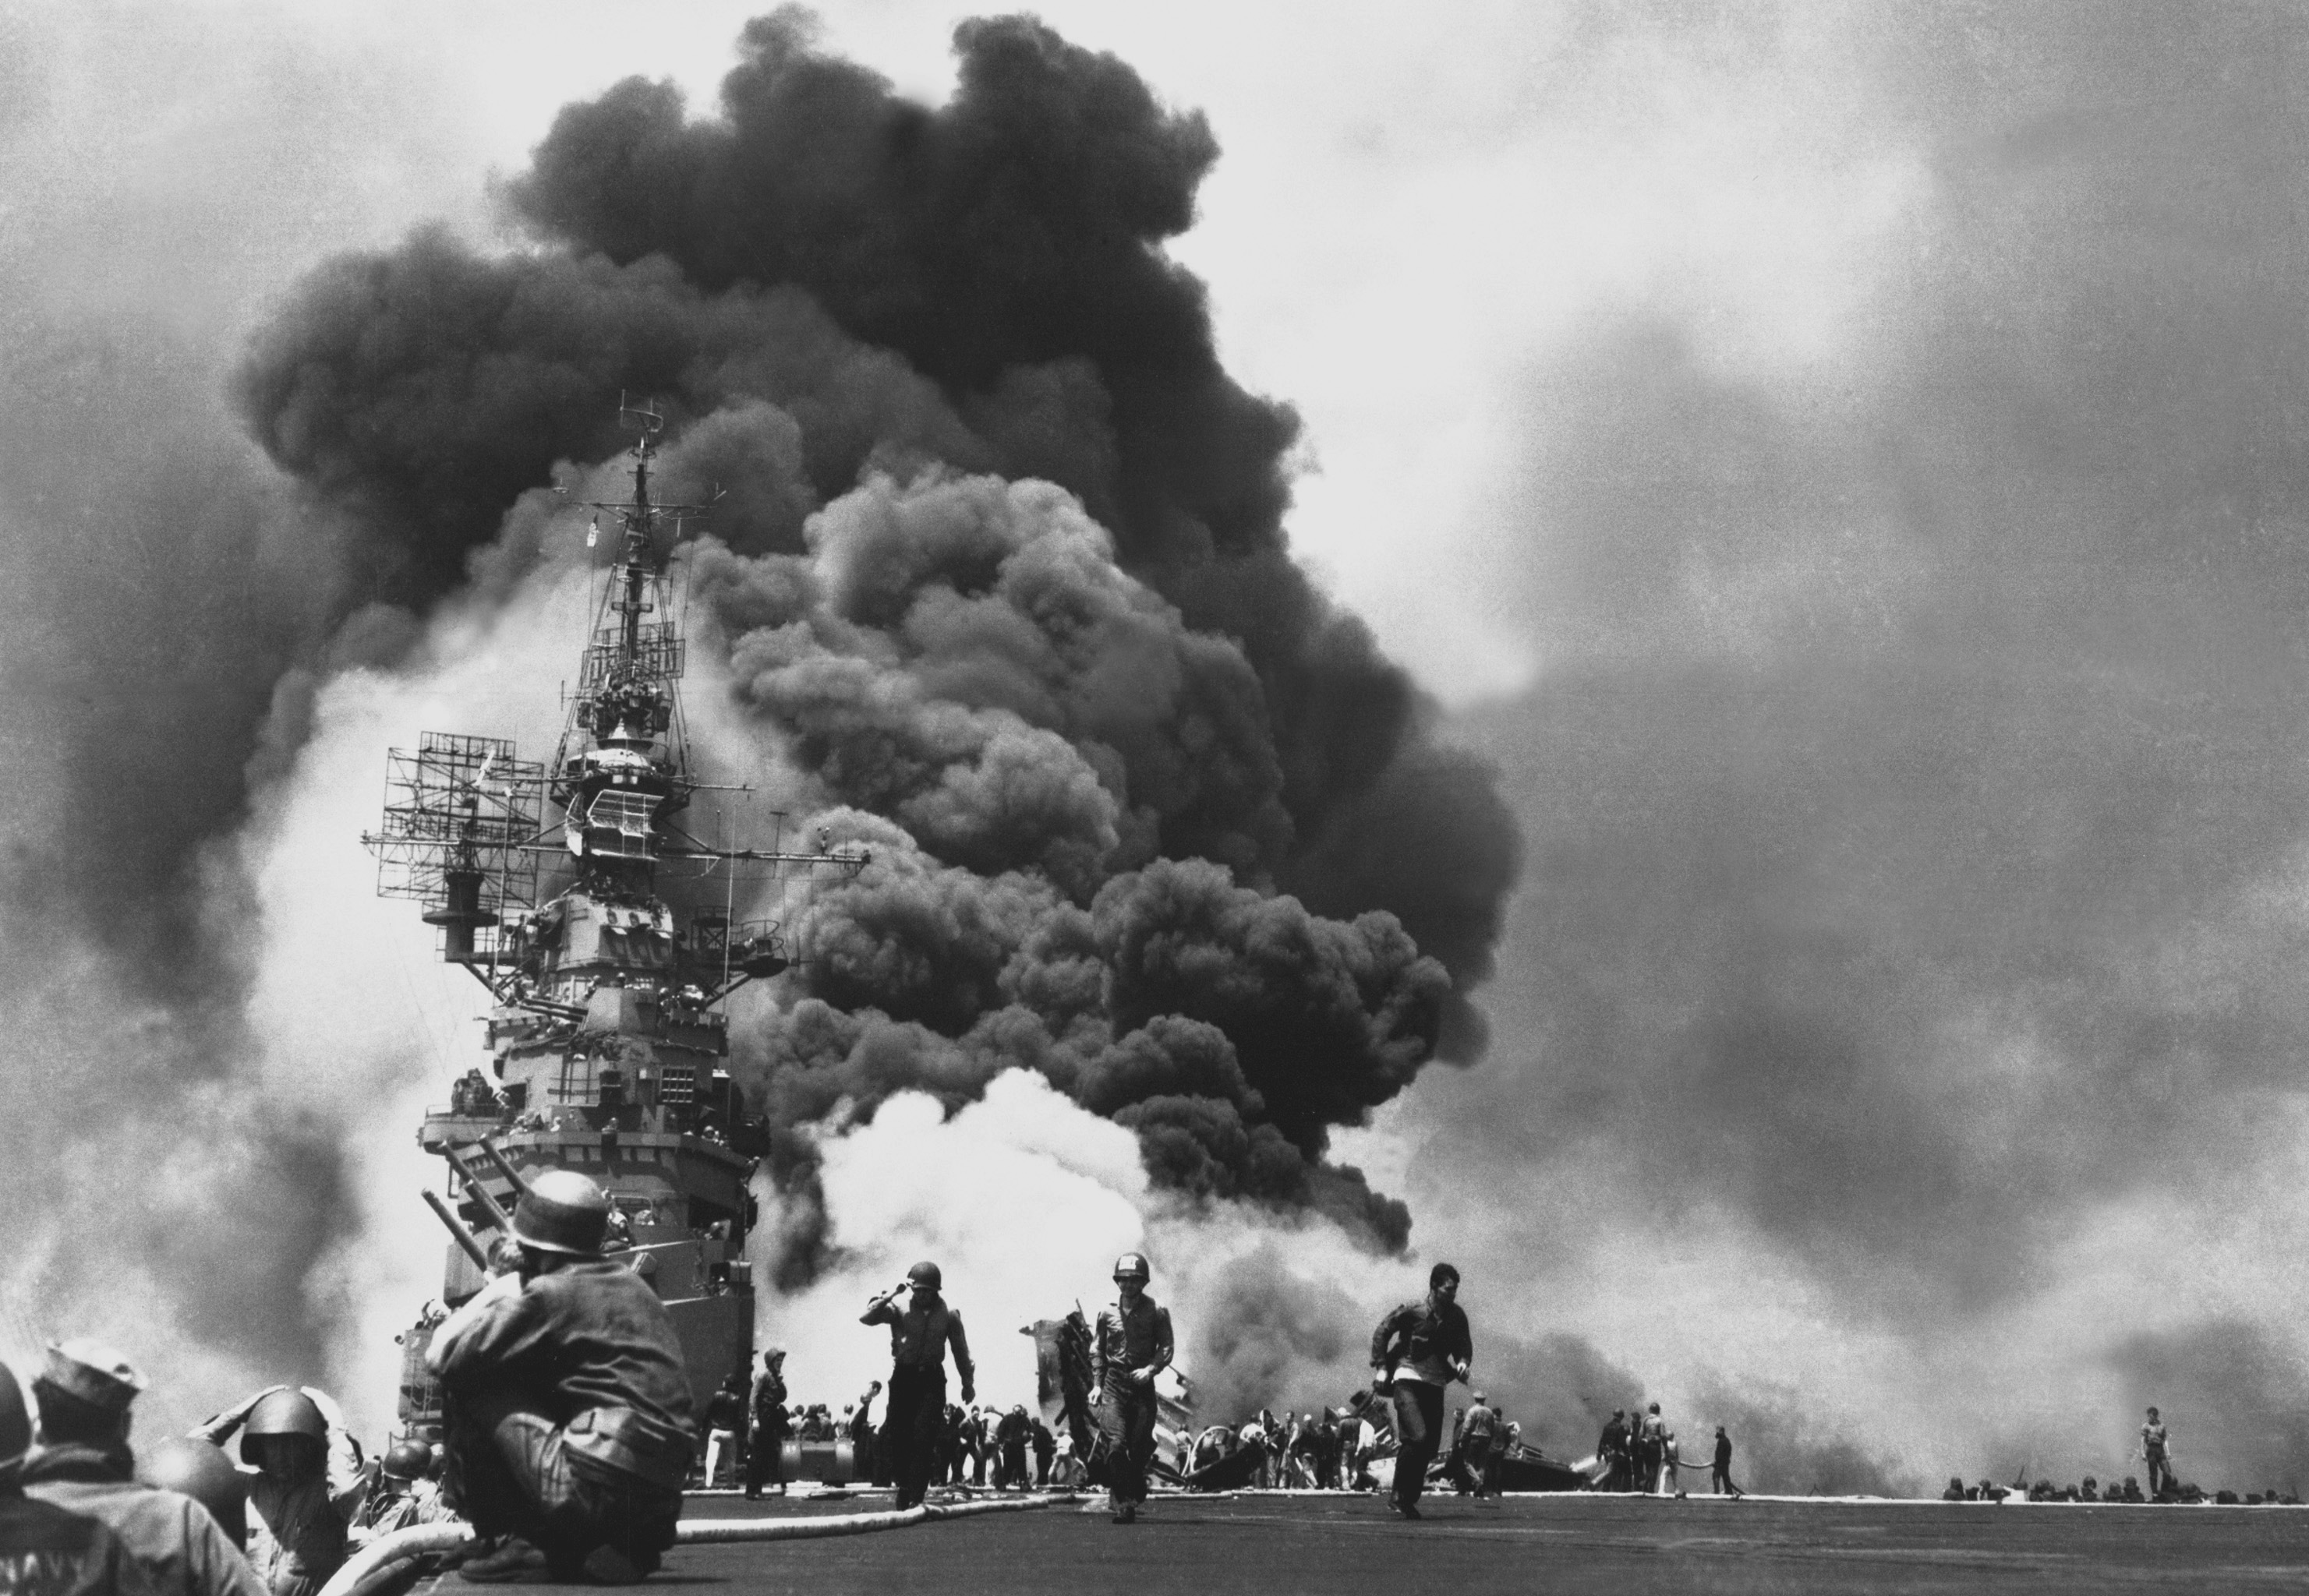 Aircraft carrier USS Bunker Hill burns after being hit by two kamikaze planes within 30 seconds.